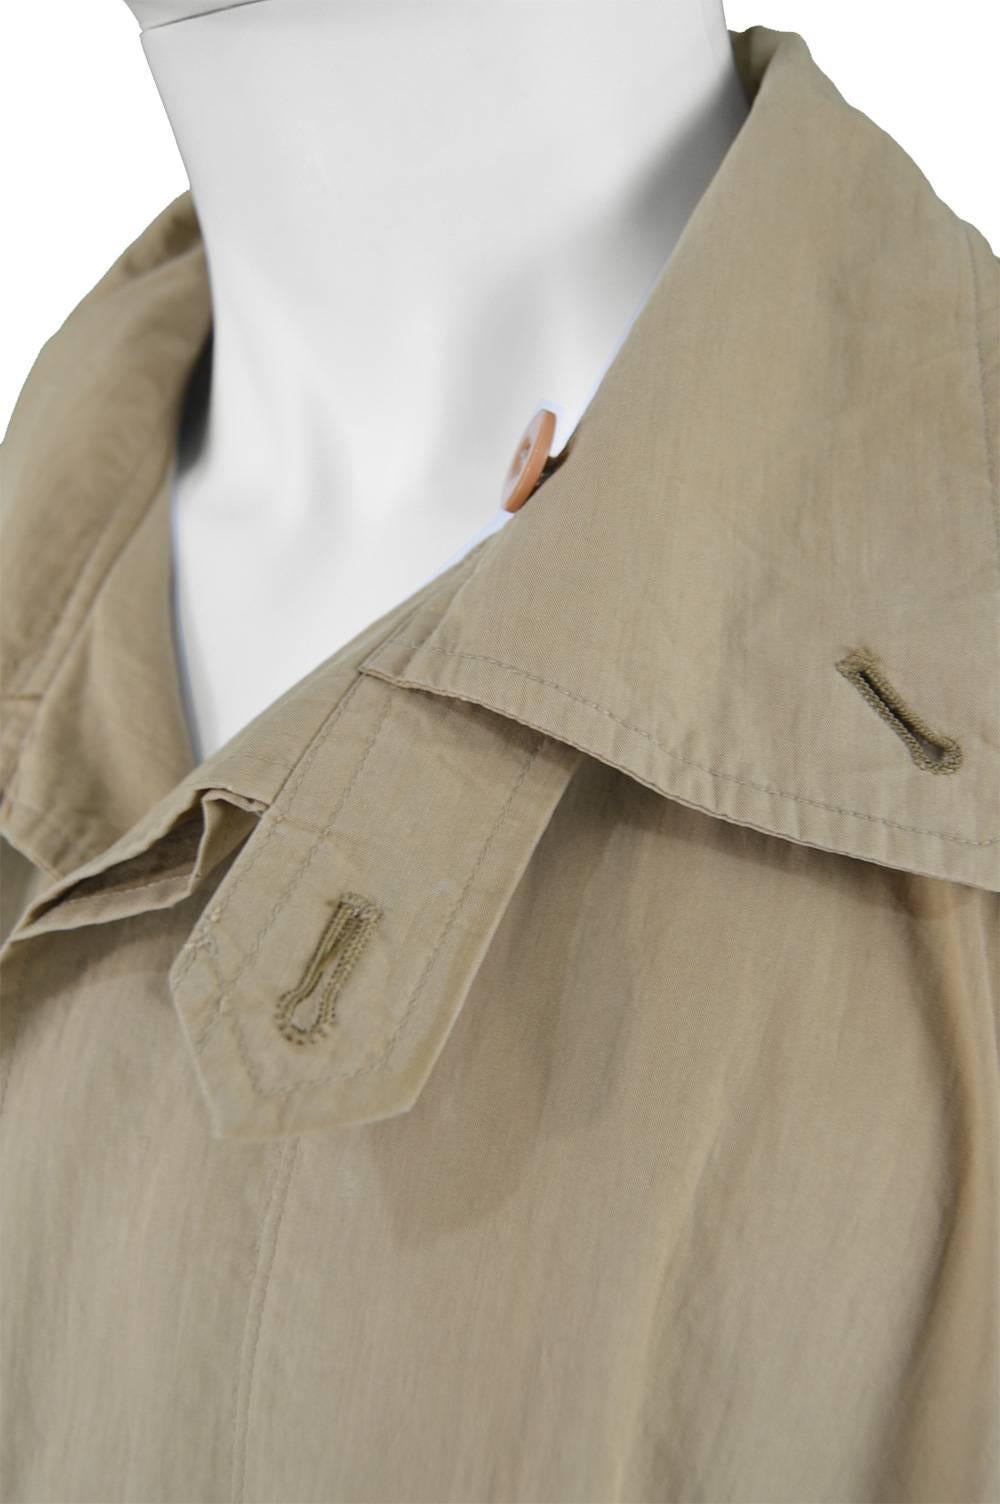 Issey Miyake Men's Rare Vintage Oversized Khaki Lightweight Windcoat, 1980s In Good Condition For Sale In Doncaster, South Yorkshire